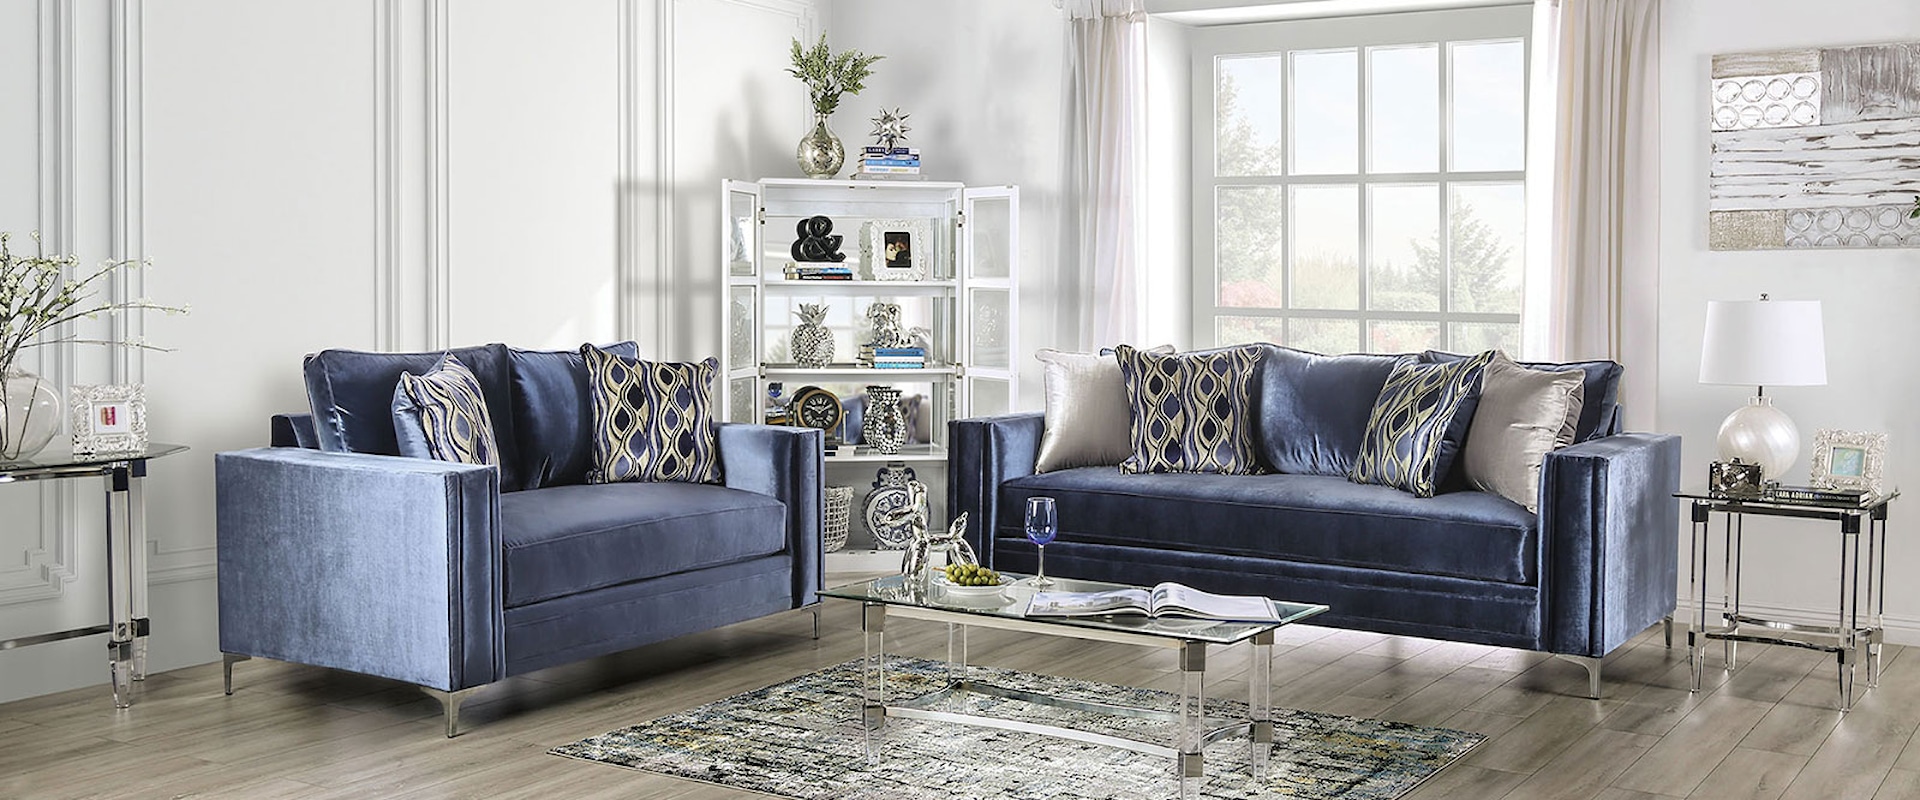 Contemporary Sofa and Loveseat Set with Chrome Legs